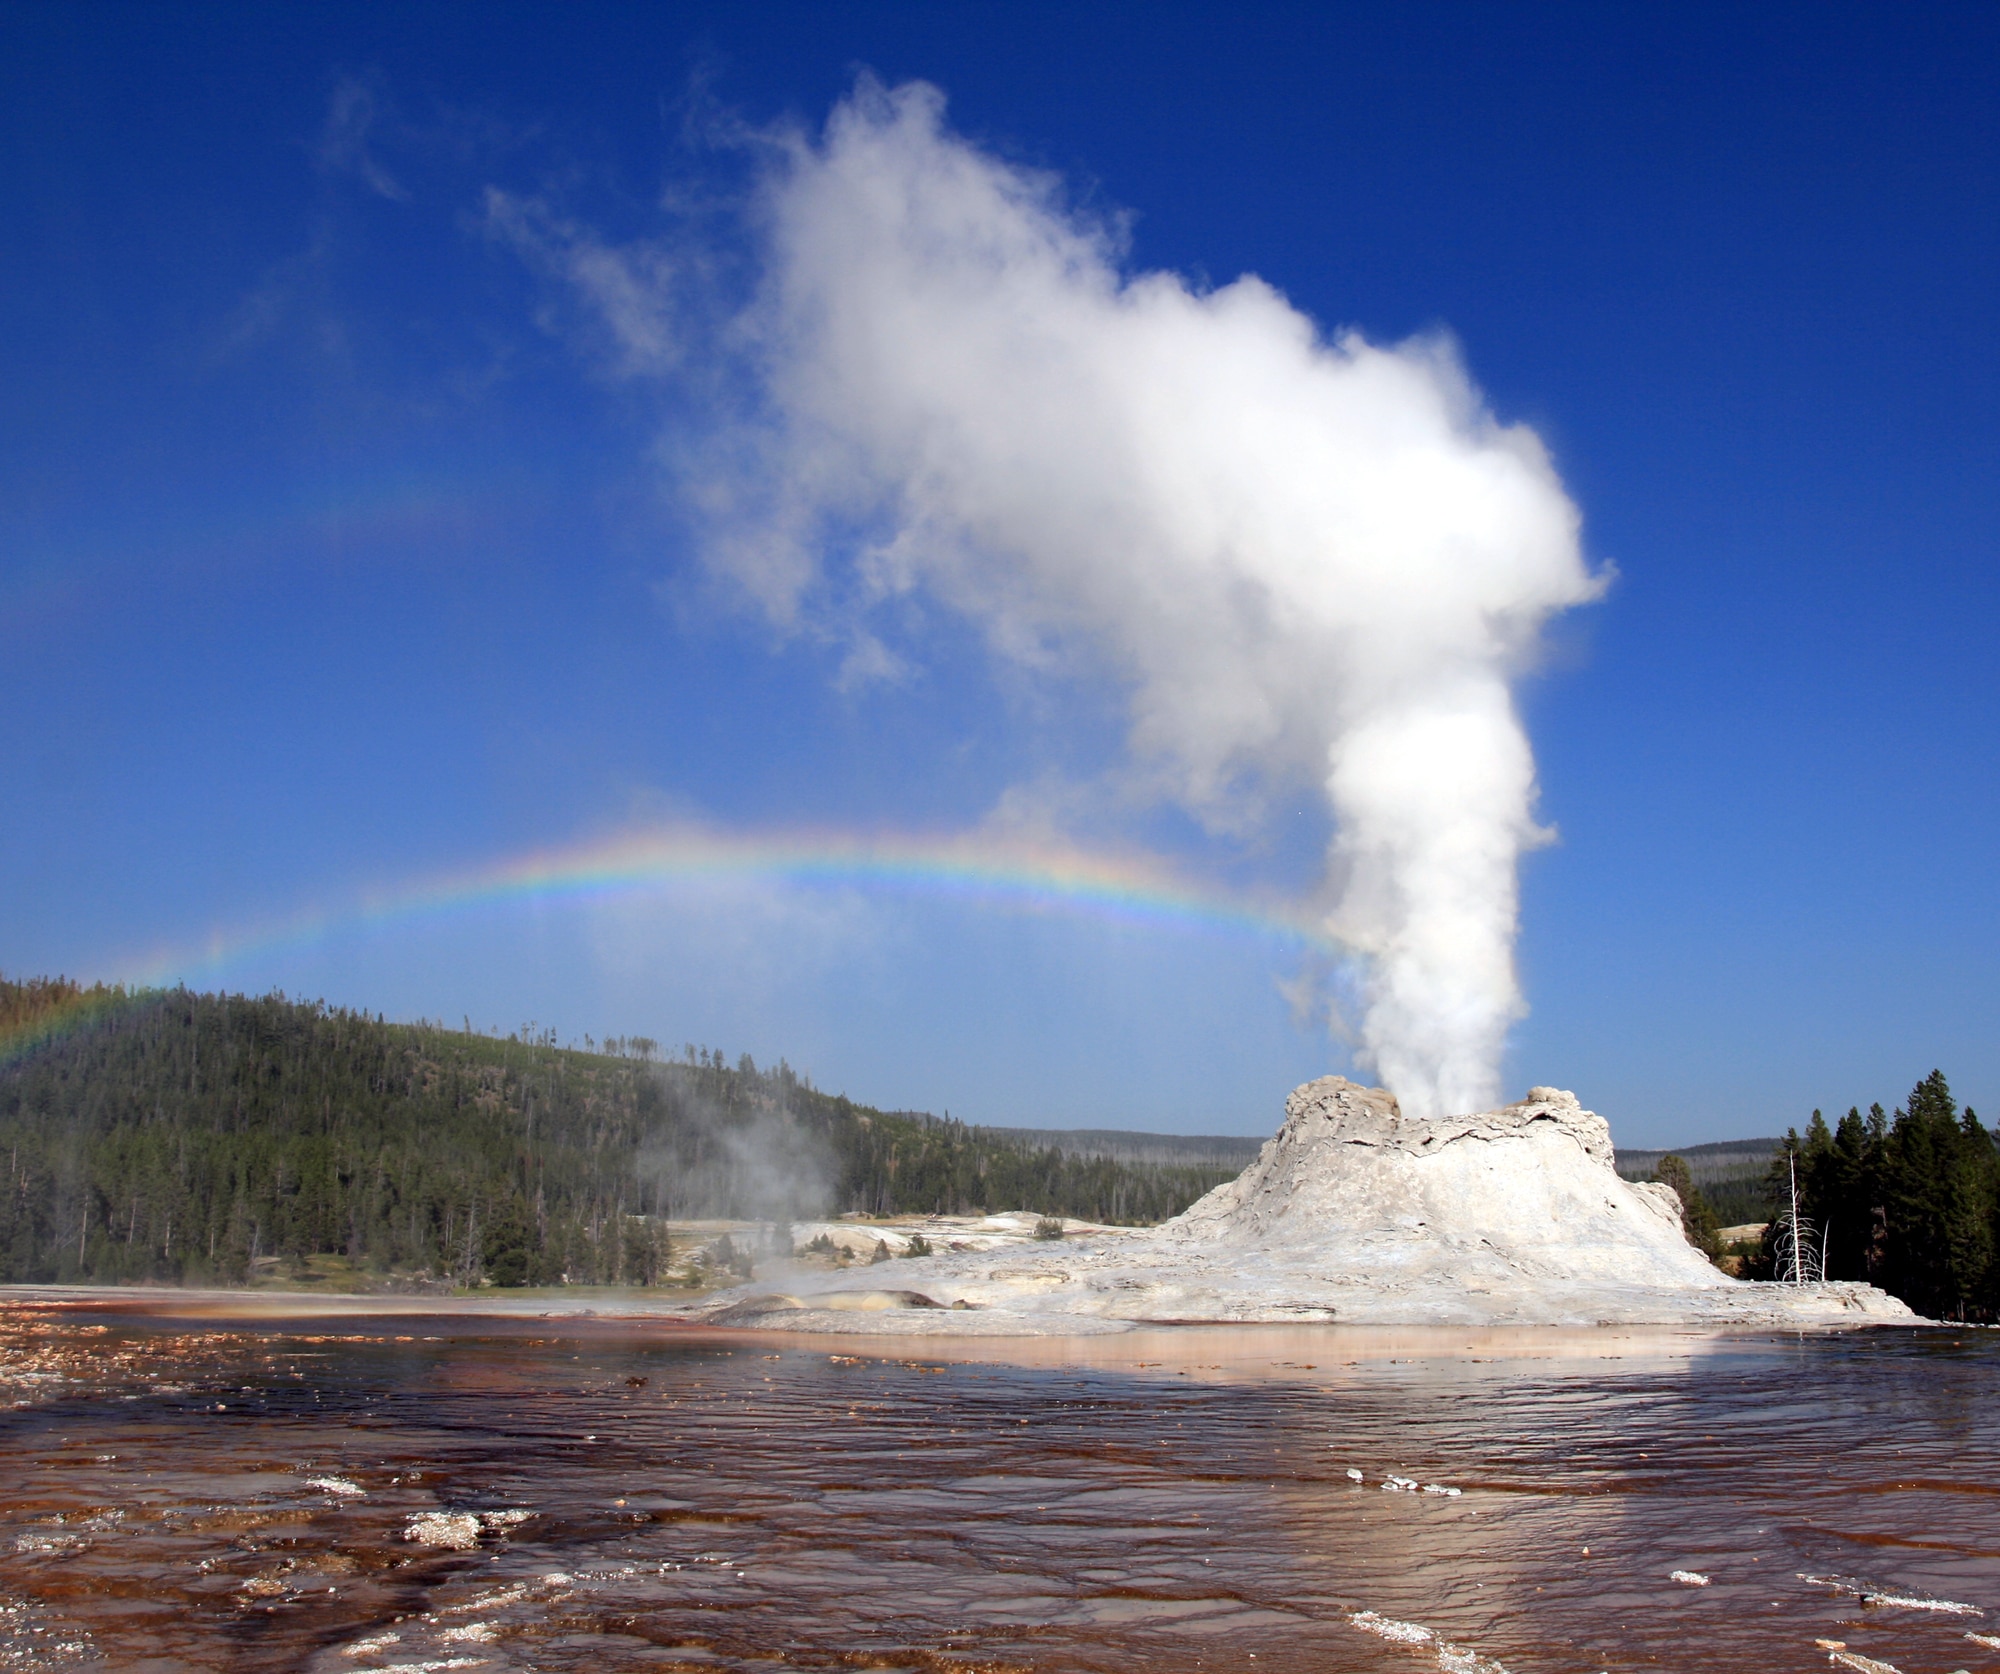 Yellowstone National Park Facts include the story of the Washburn Party which convinced America that it was a place filled with natural wonders.